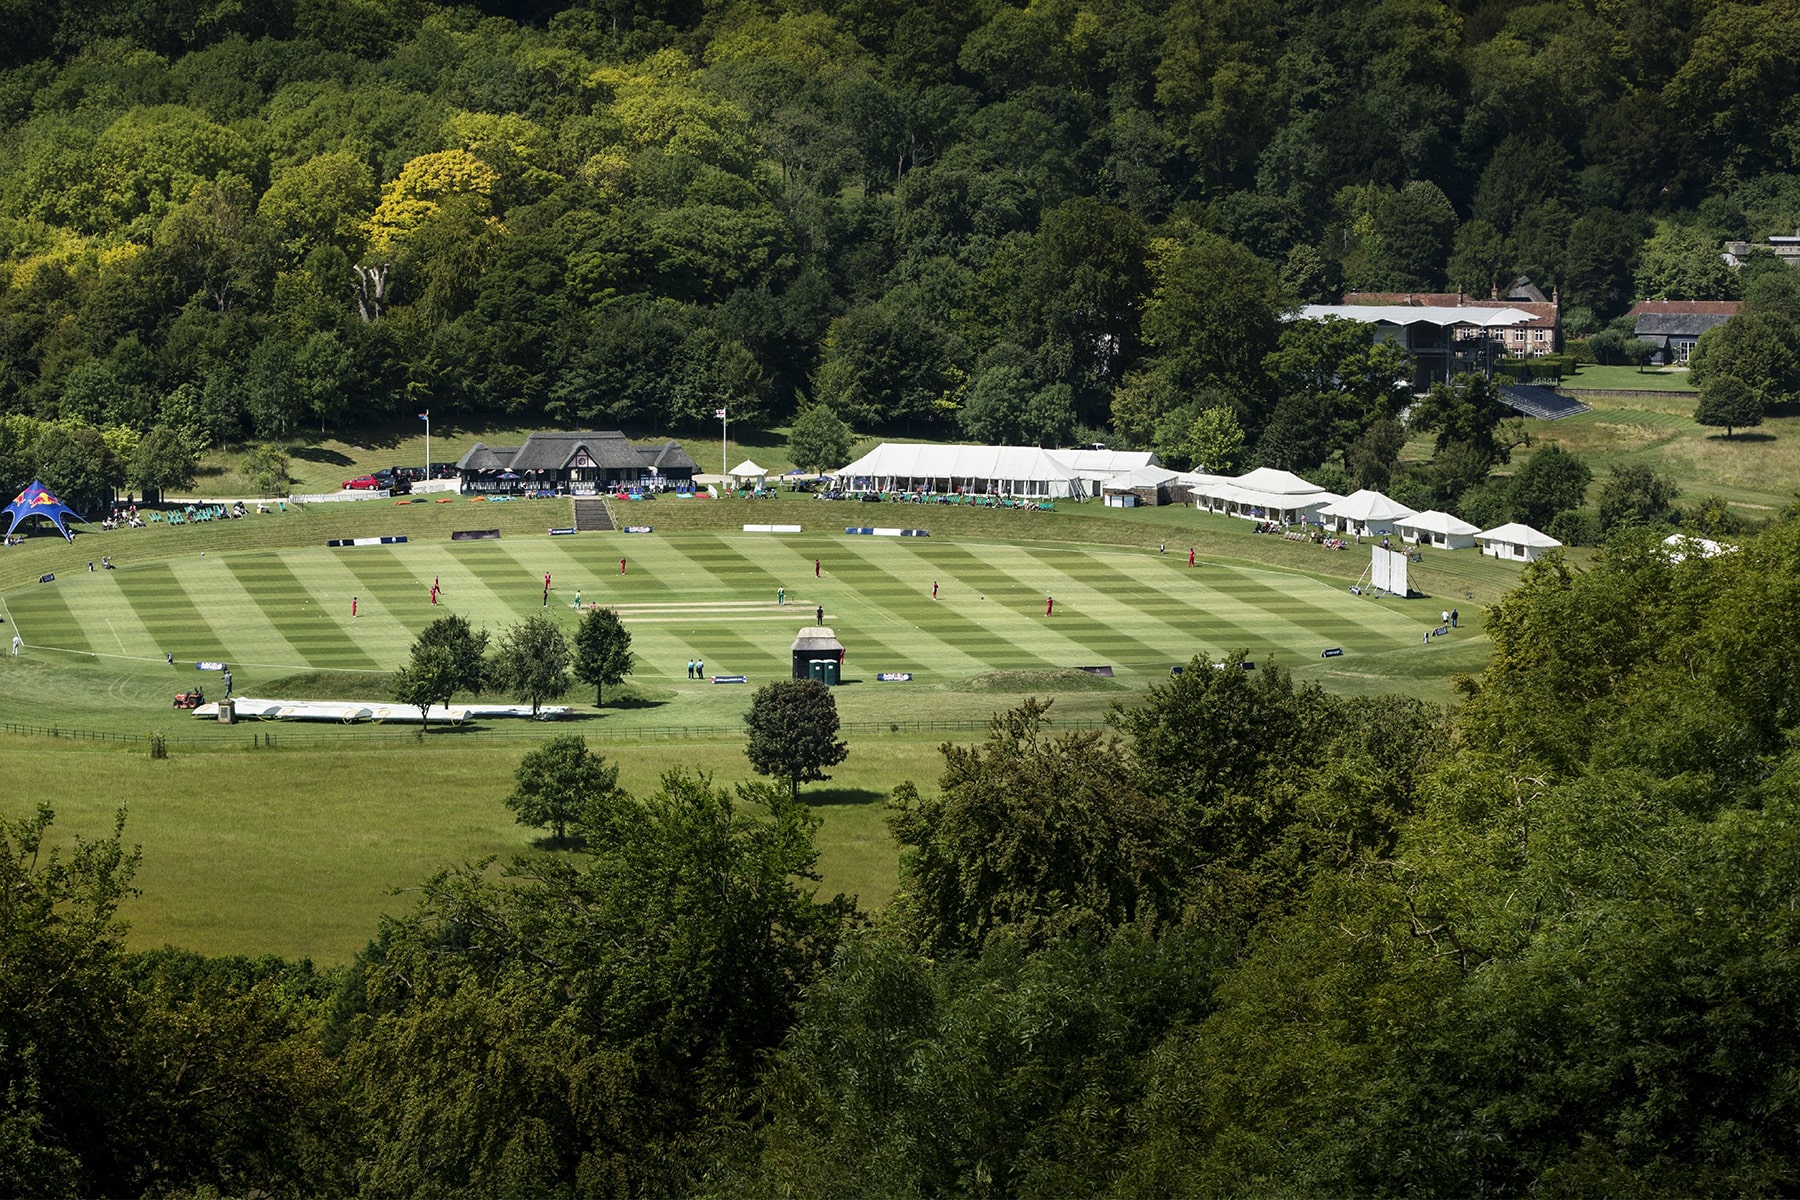 Celebrate this summer at the Festival of Cricket